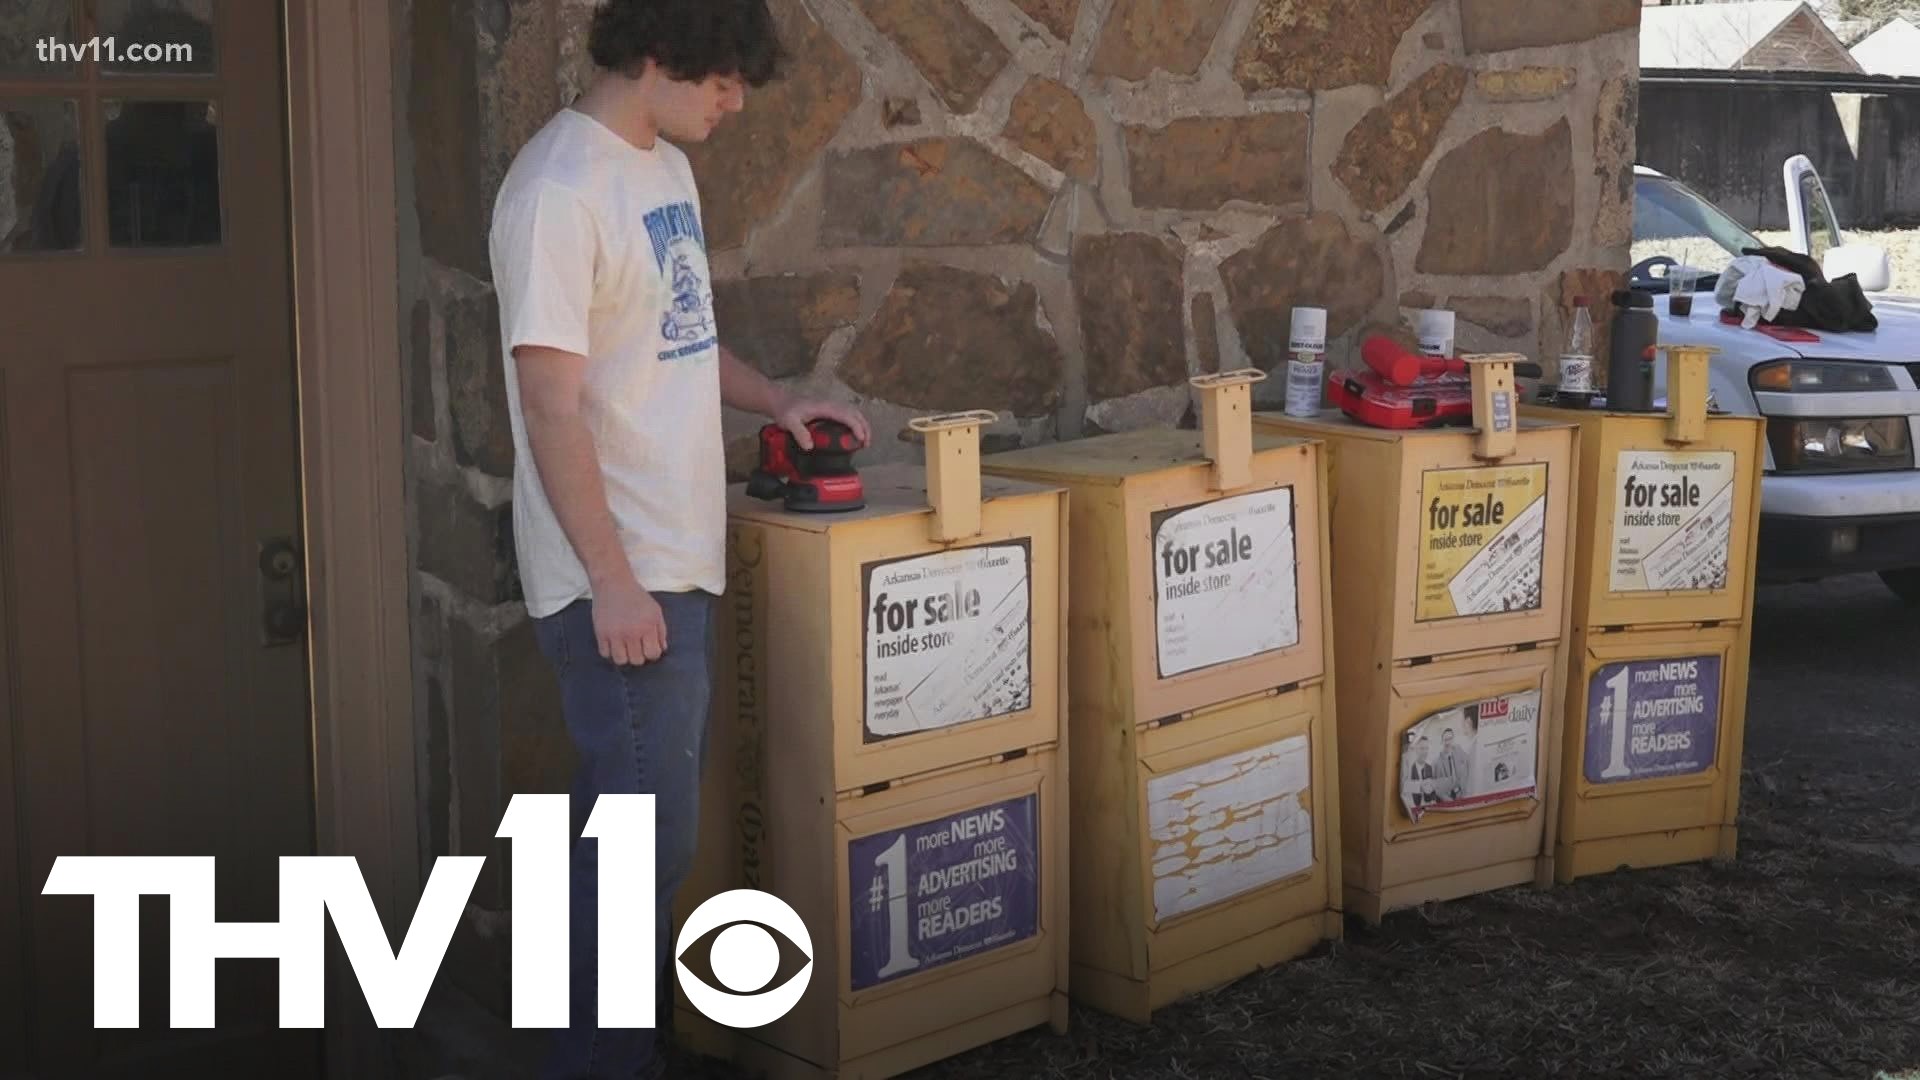 Several organizations are turning old newspaper dispensers into mini food pantries to help make a difference for hungry Arkansans.